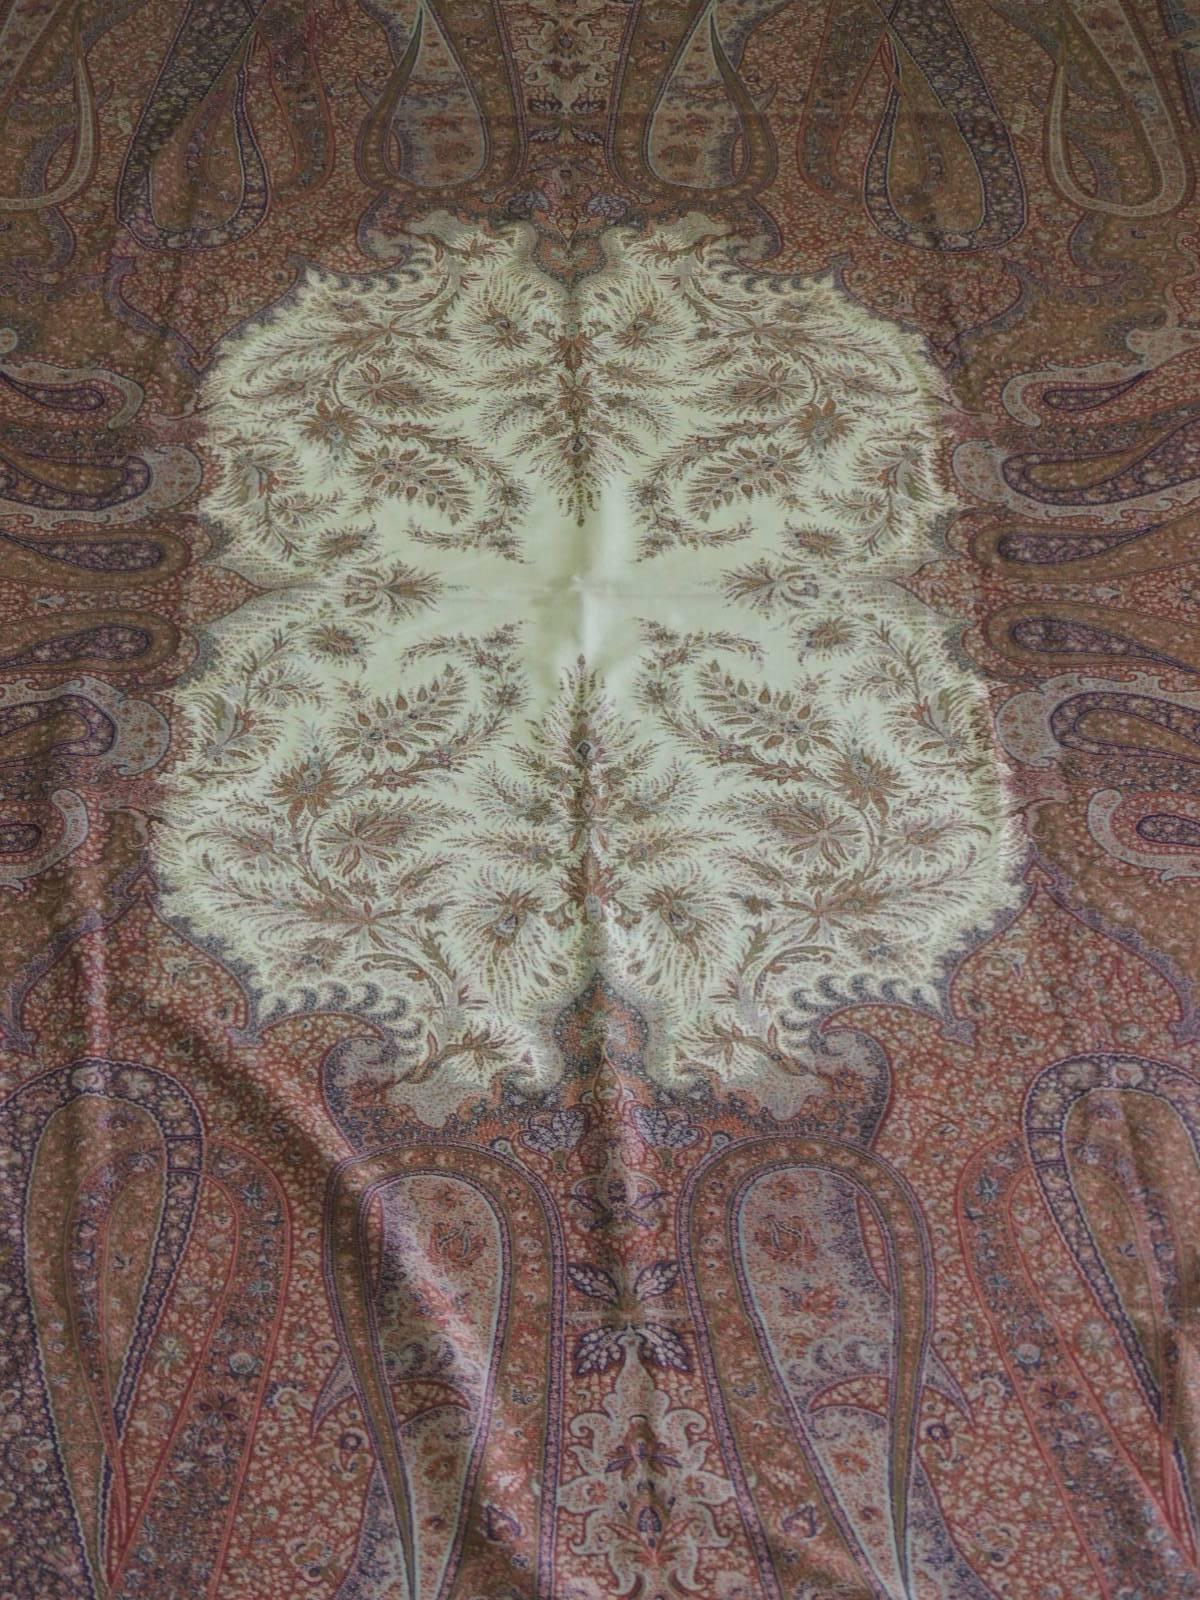 Monumental 19th century paisley Kashmir shawl/cloth. Large-scale paisley pattern with natural color center medallion. Tapestry-twill double interlocked at each joining field. Needle embroidery. In shades of orange, brown, natural, soft green,